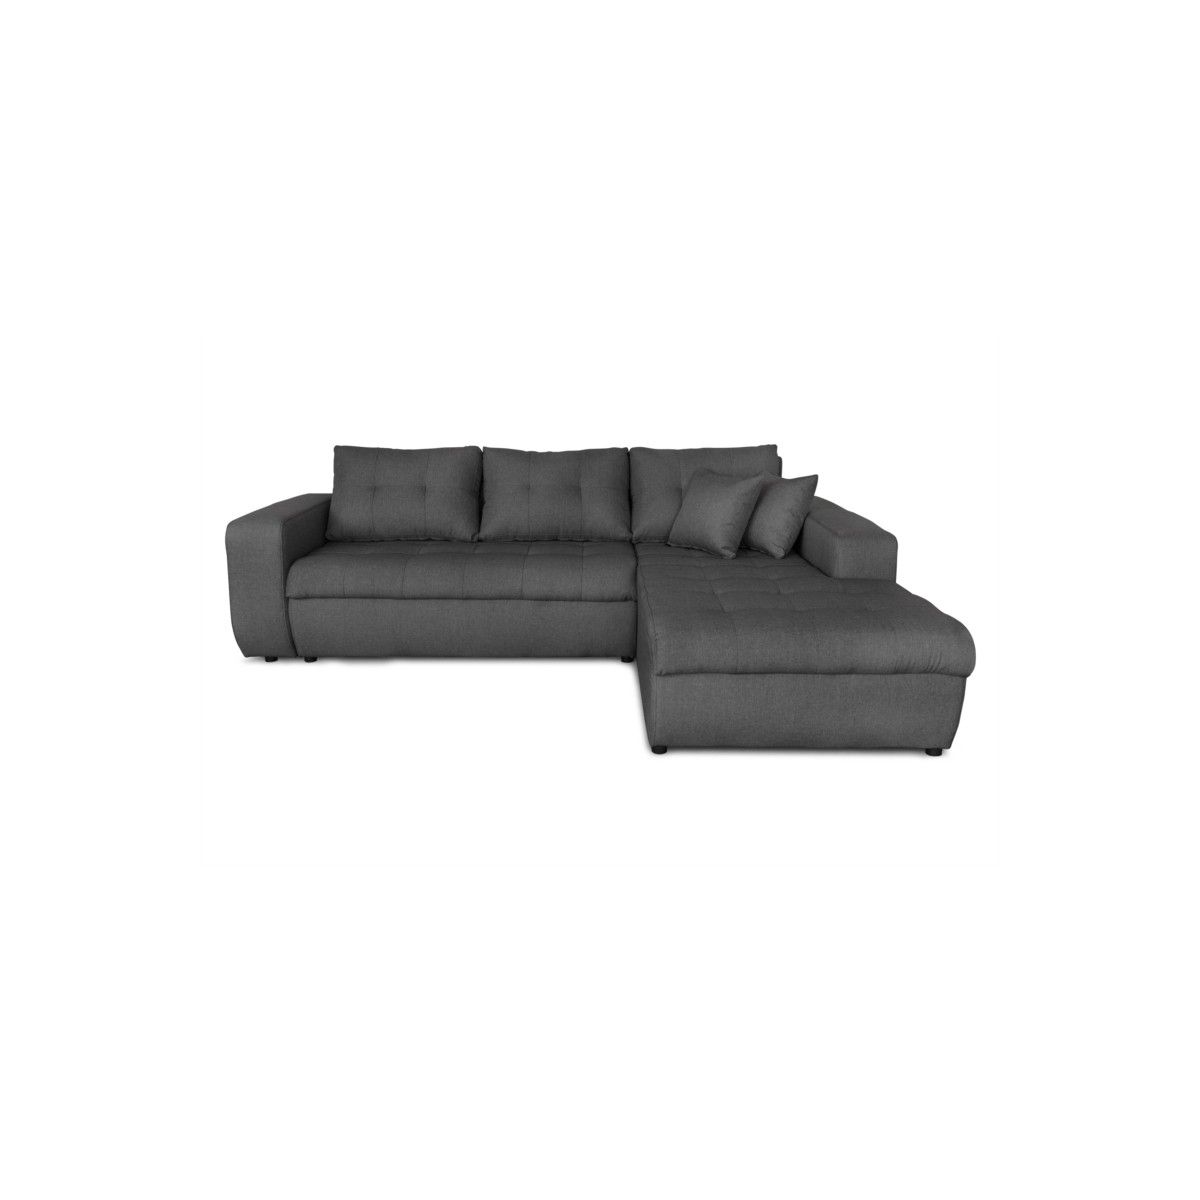 Convertible Corner Sofa 4 Places Fabric Right Angle Bond (dark Grey) – Amp  Story 8769 With 8 Seat Convertible Sofas (View 14 of 15)